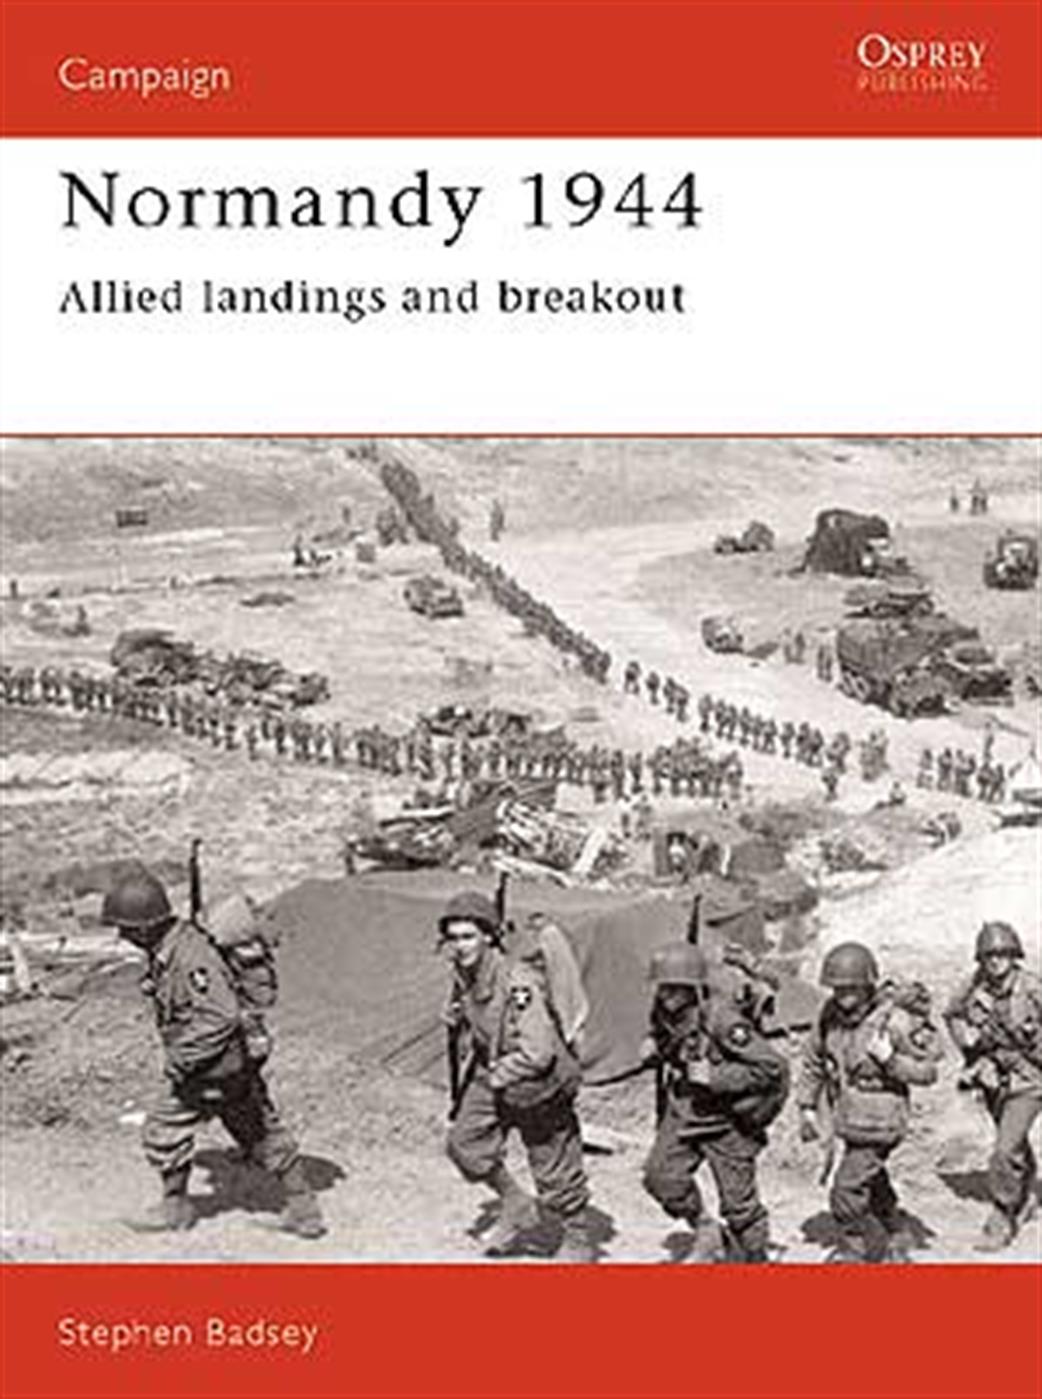 Osprey 0850459214 Normandy 1944 Allied Landing and Breakout book